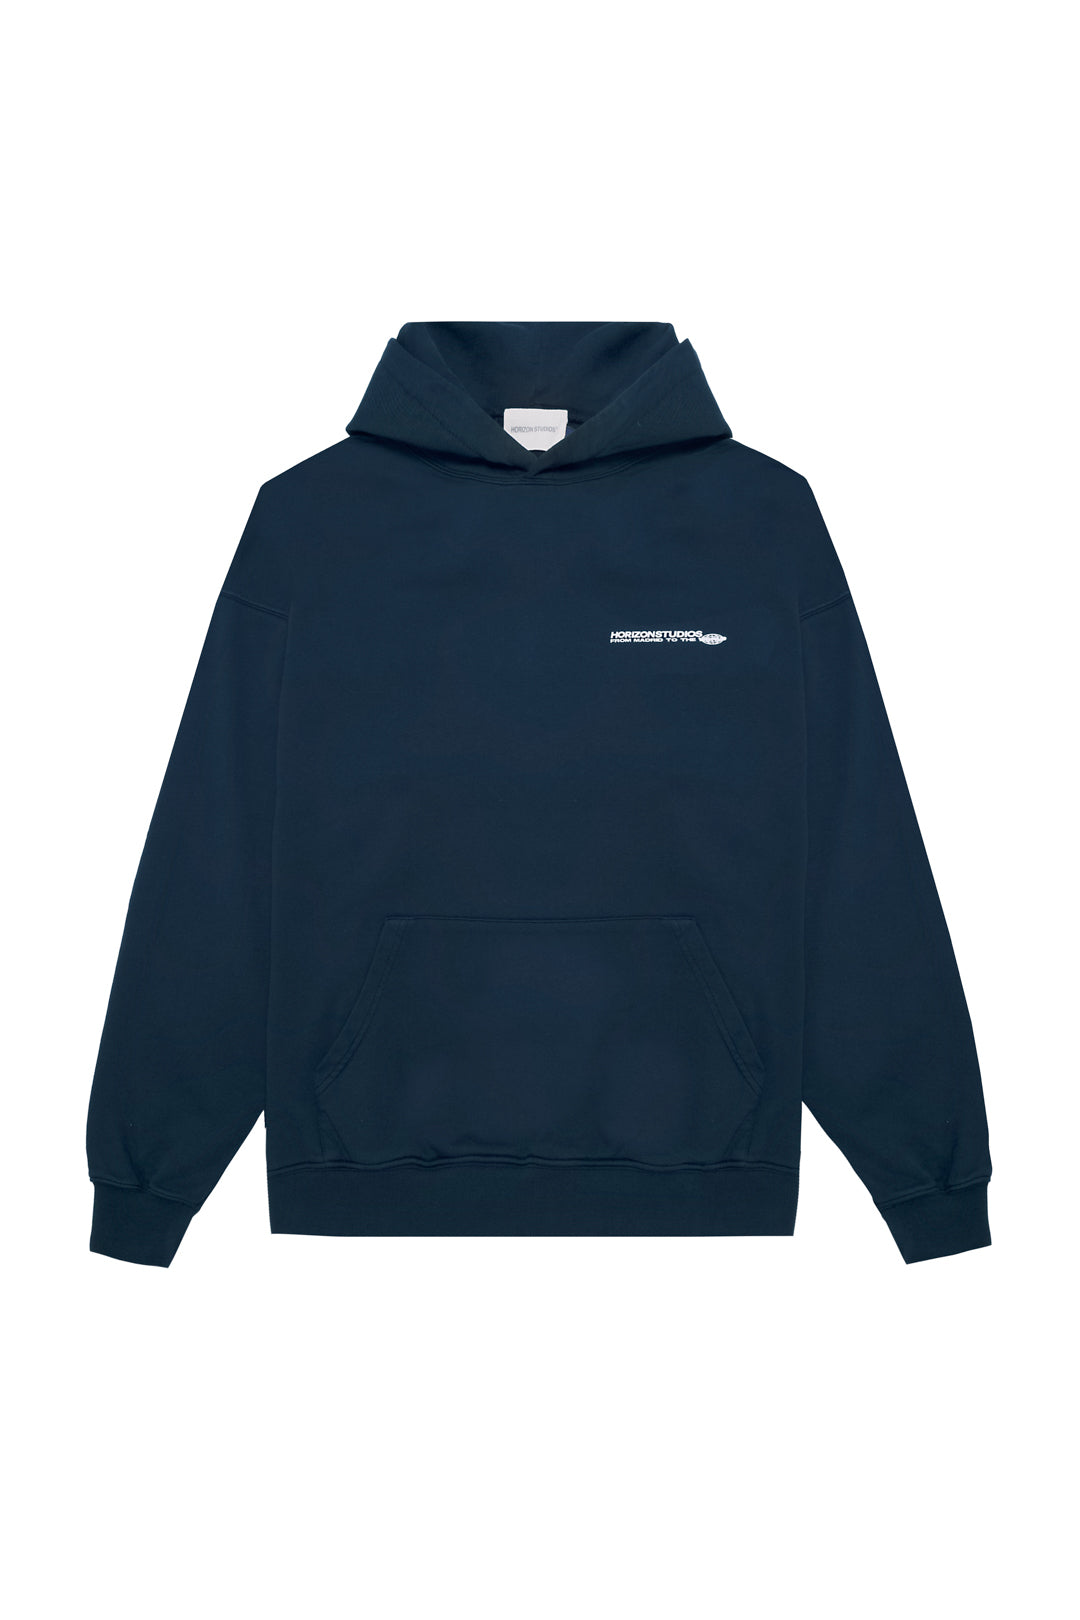 Navy “To The World” Hoodie